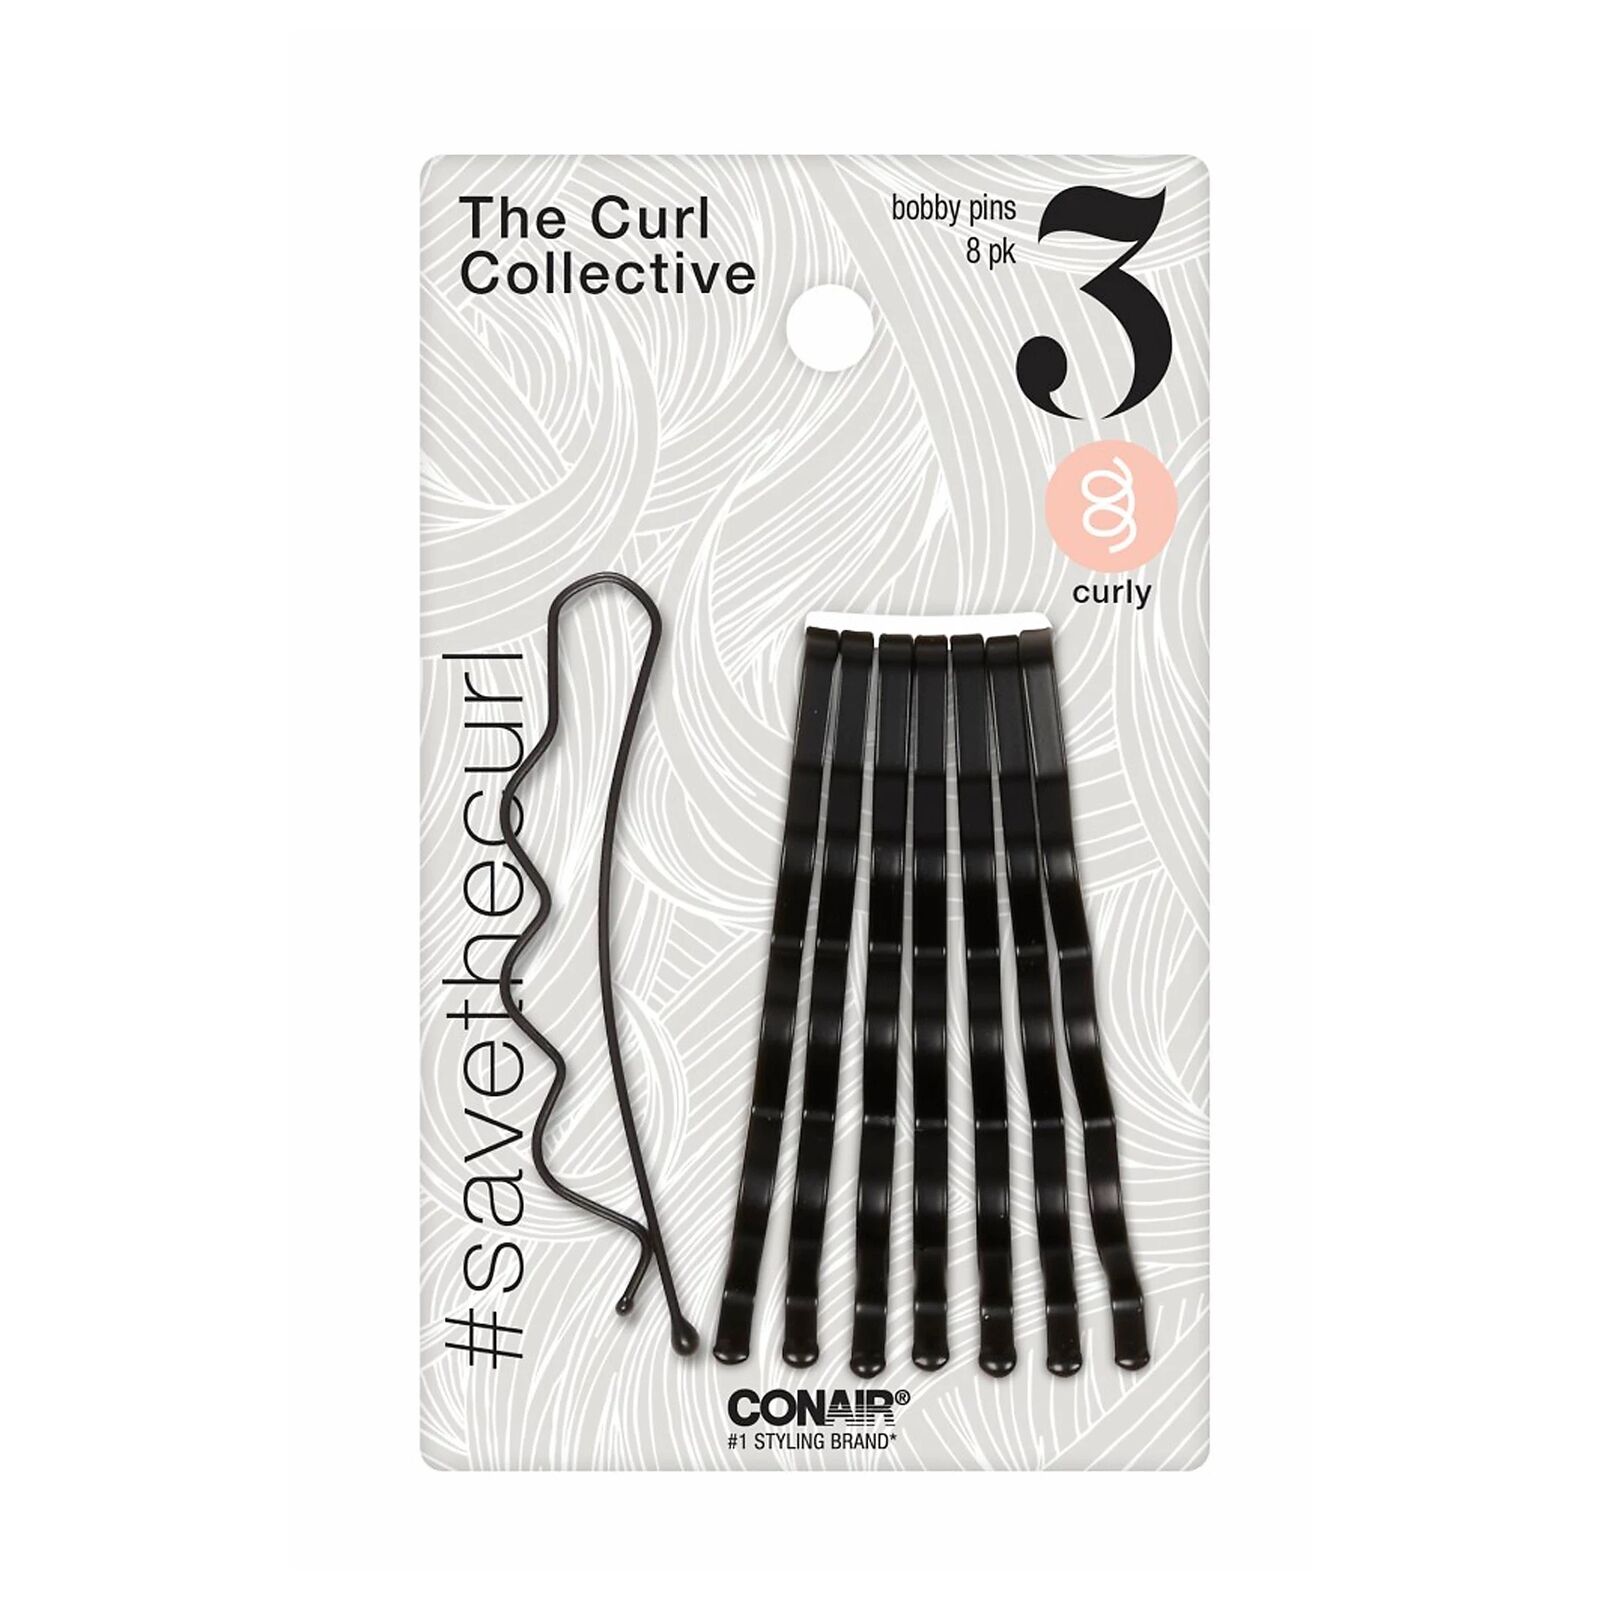 Conair The Curl Collective Hair Curly Bobby Pins, Black, 8-Pieces